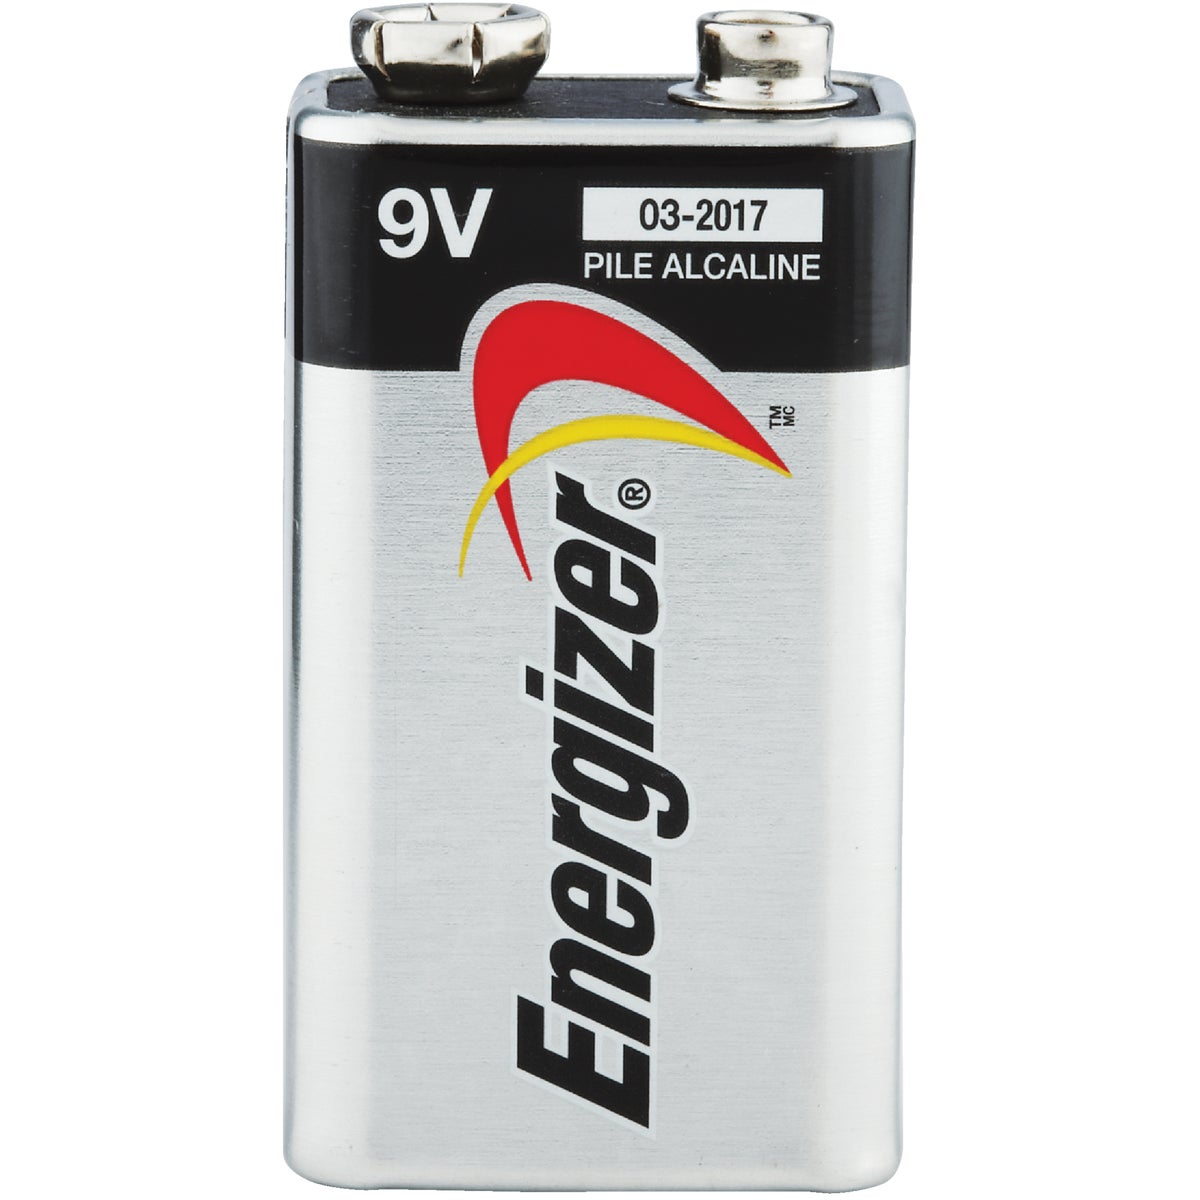 Item 822505, 9V alkaline batteries that are all about long lasting power for your 